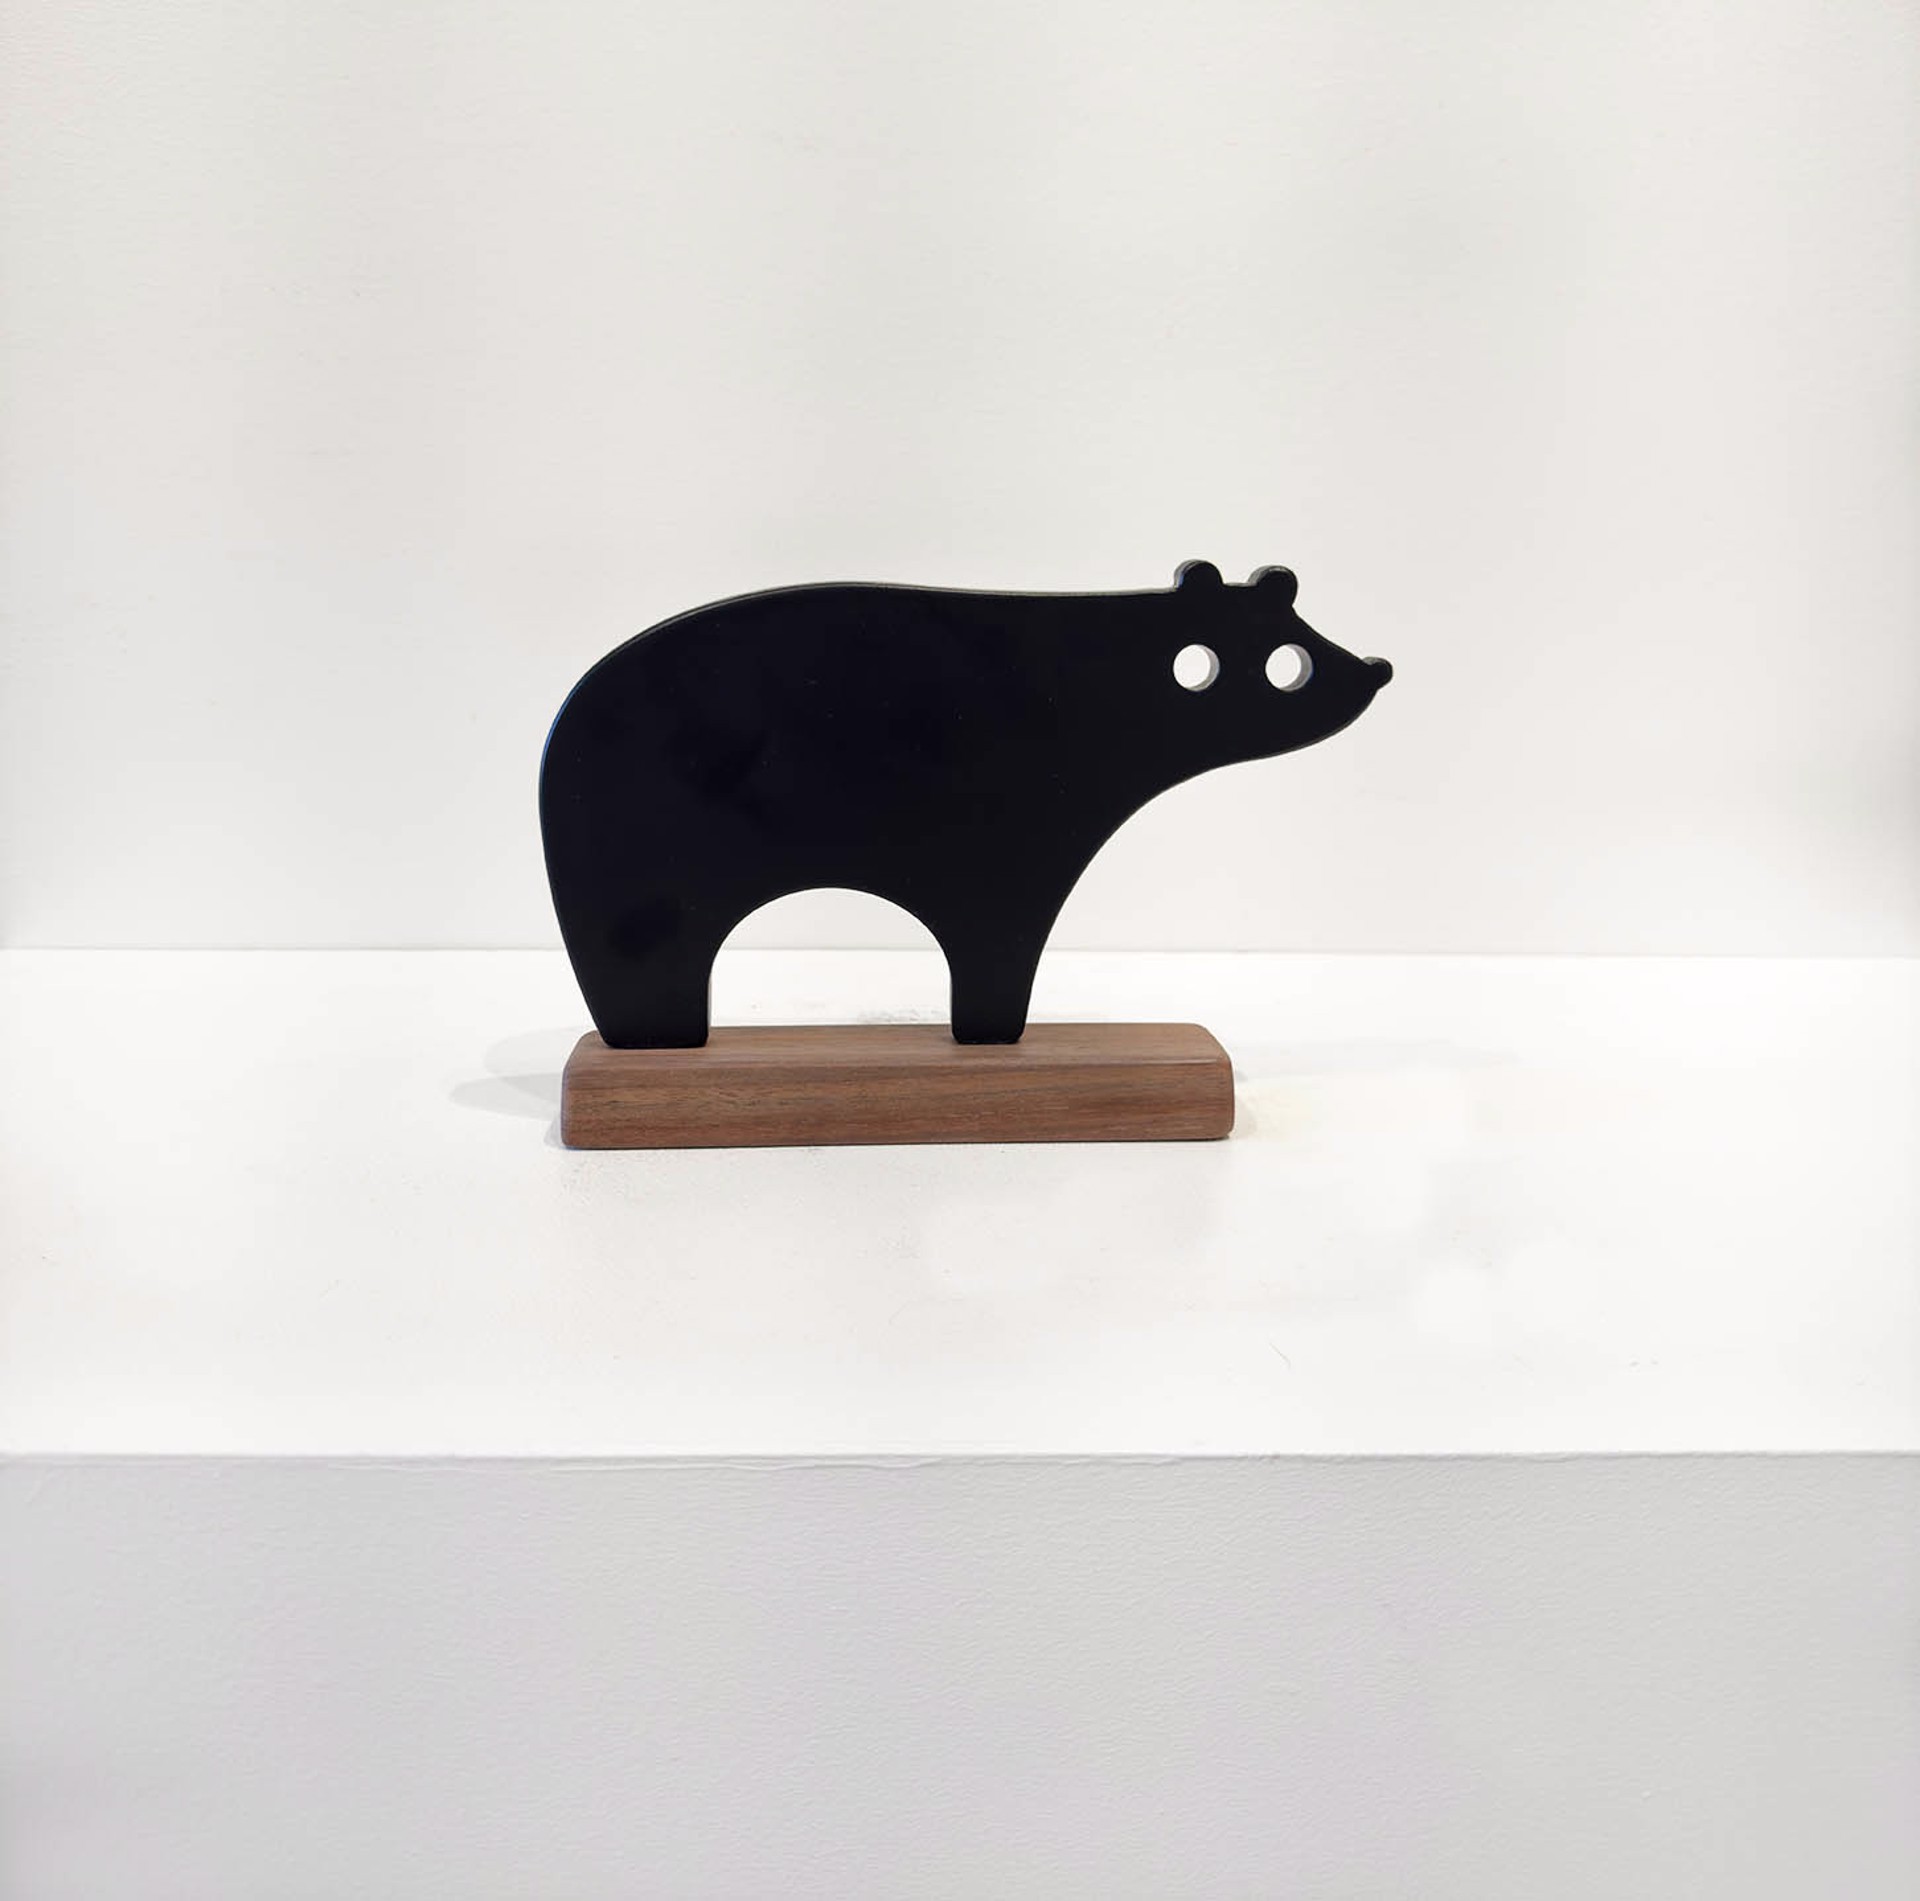 Original Steel Sculpture By Jeffie Brewer Featuring A Black Bear In Simplified Shapes On Rectangular Wooden Base